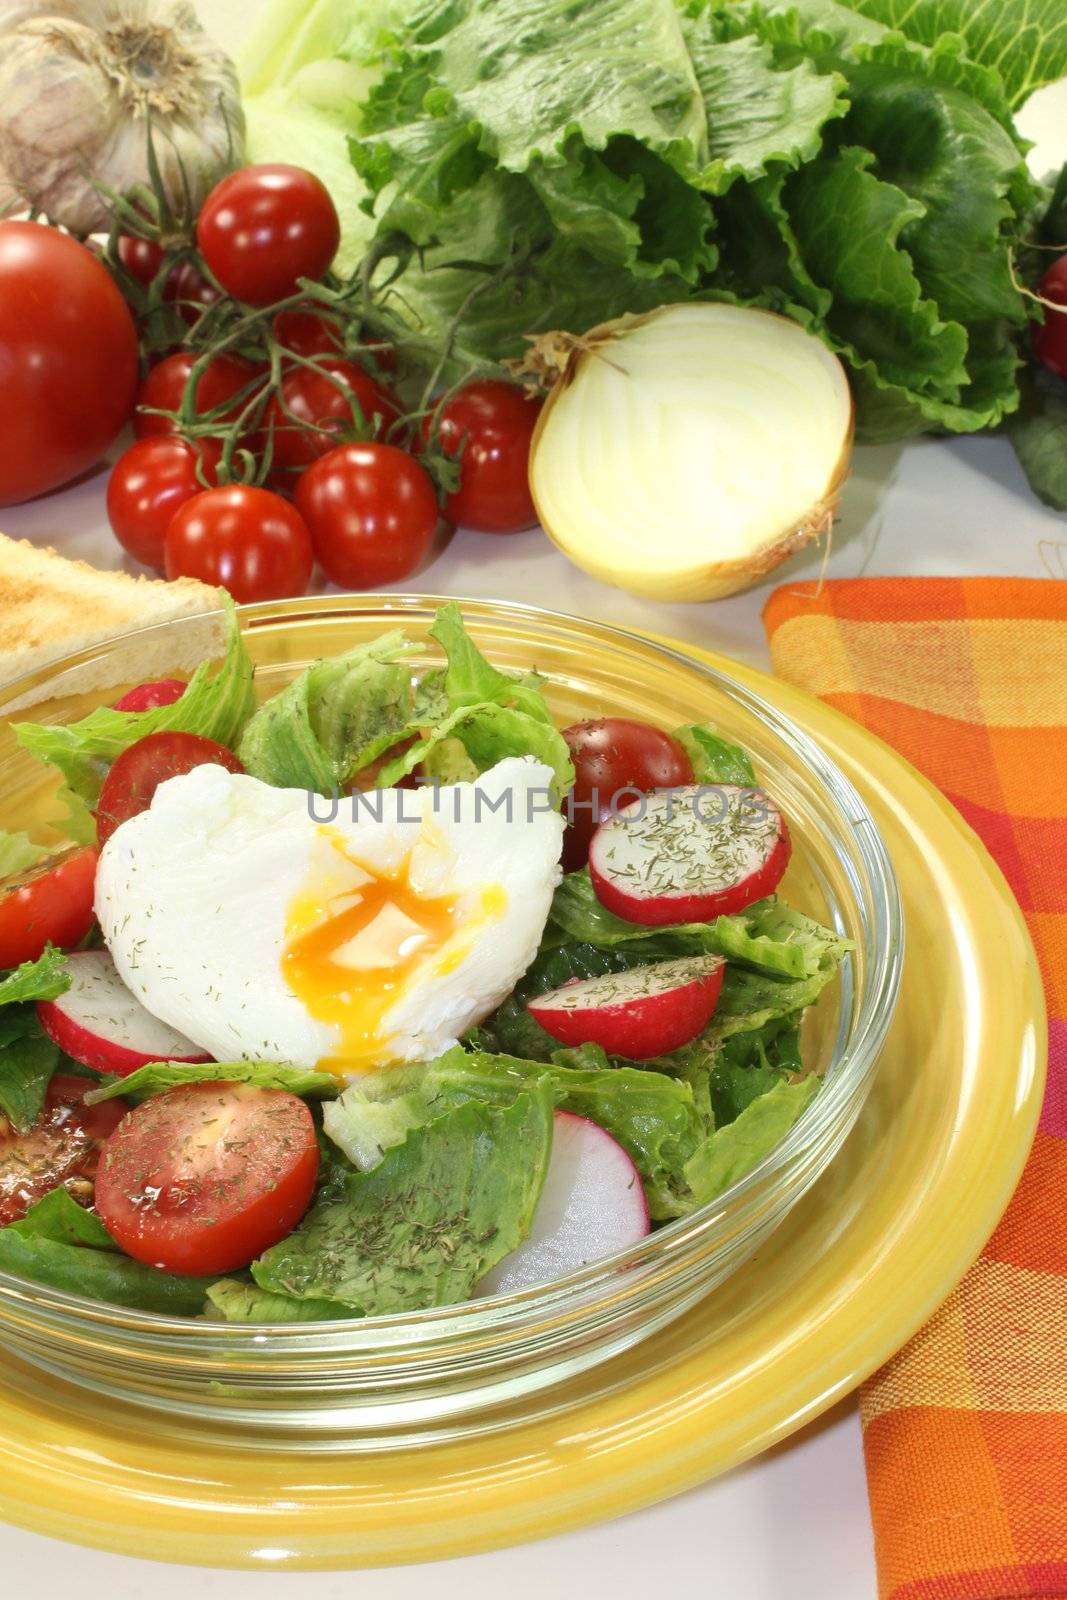 Salad with poached egg and radishes by discovery